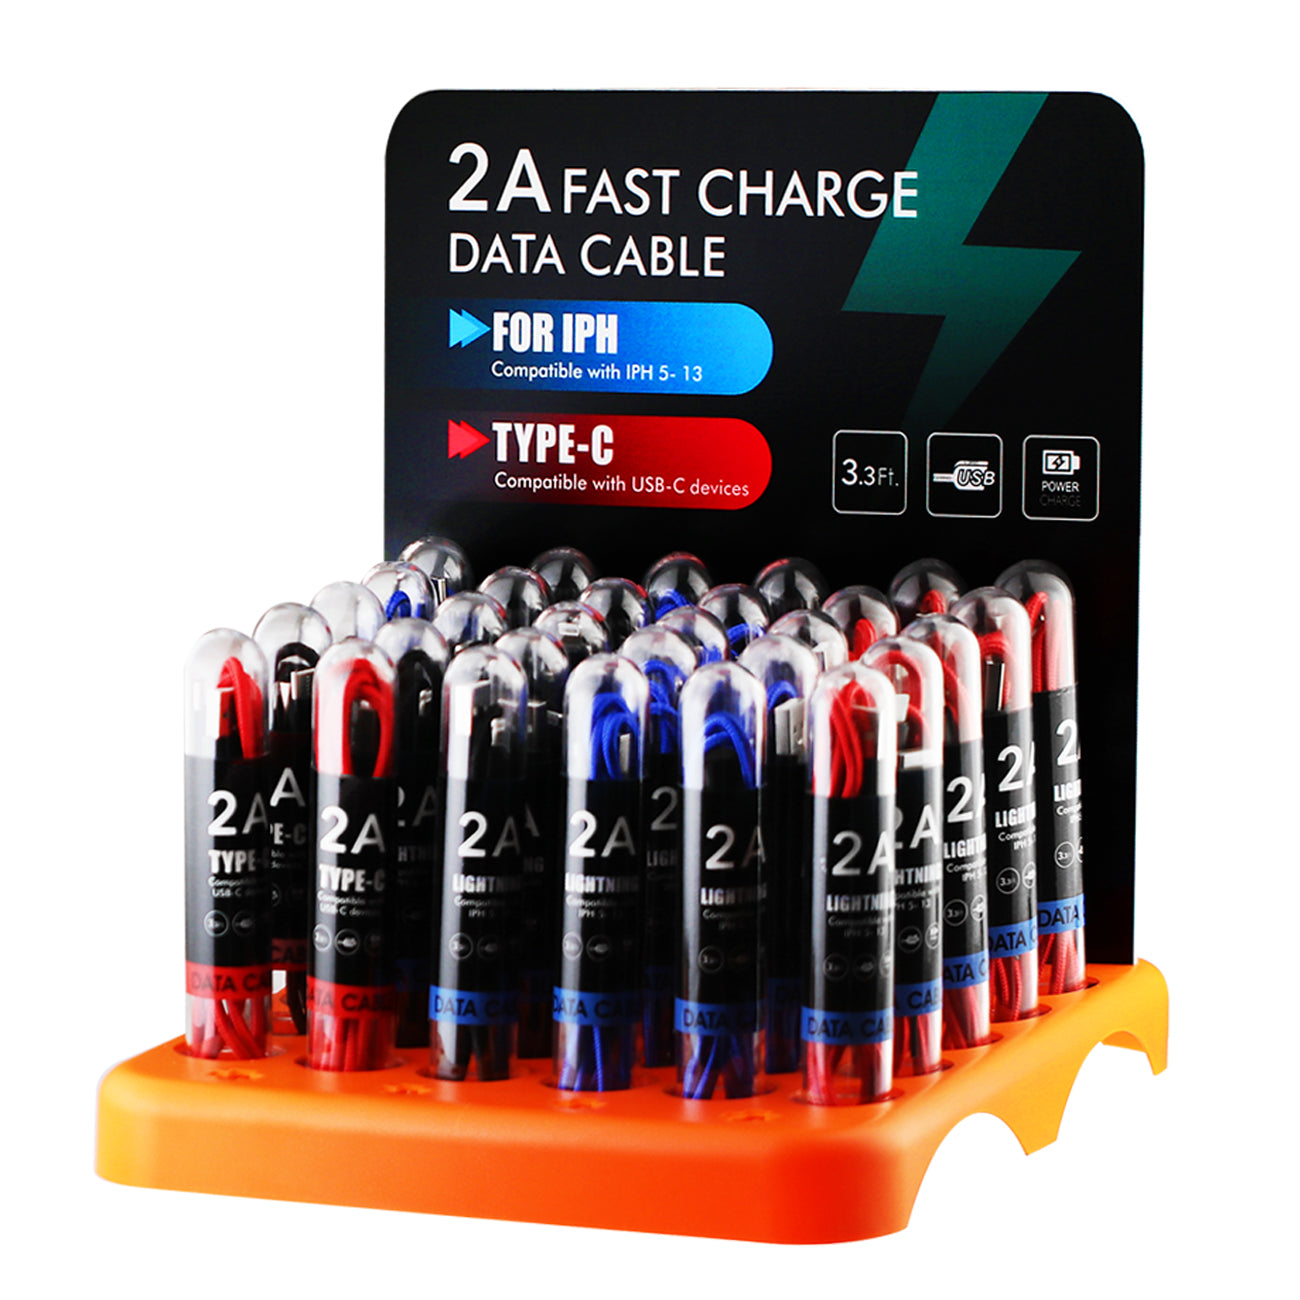 PLASTIC DISPLAY SET(30 pcs of fast charge data cable for iPhone and Type-C)